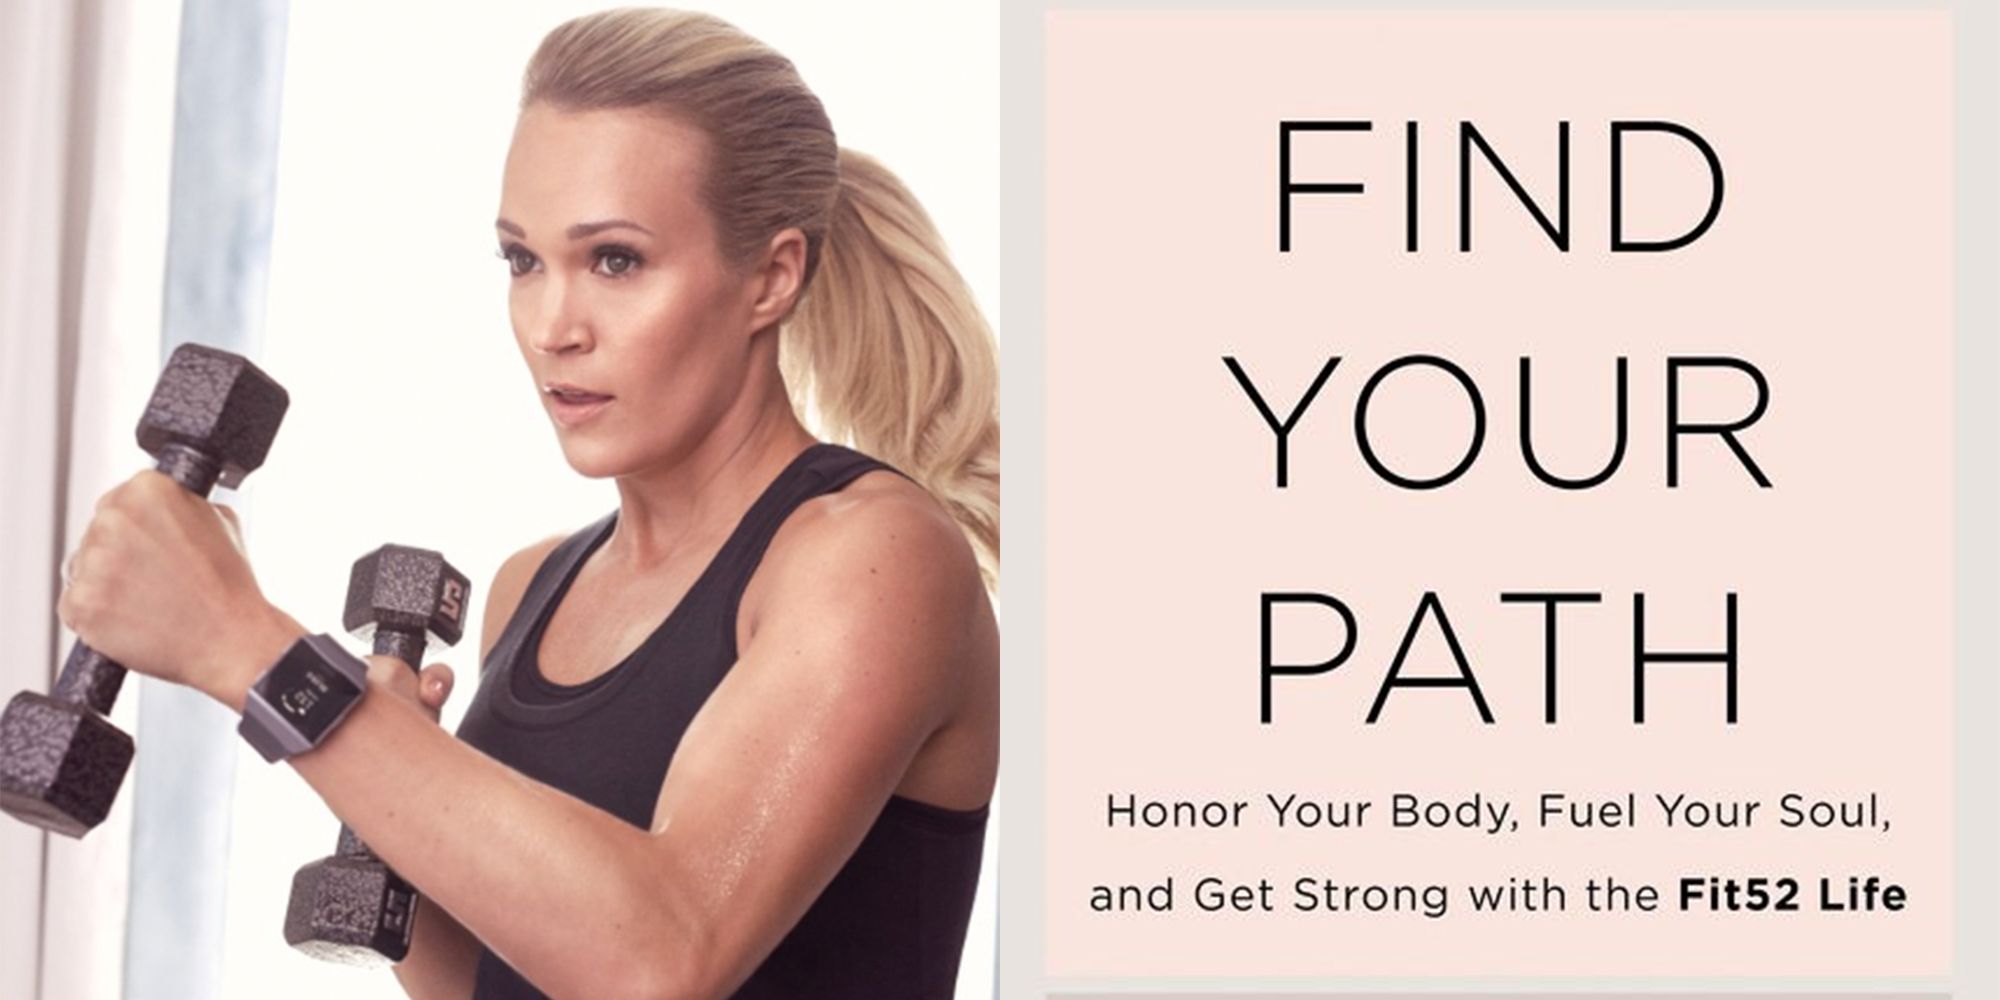 Carrie Underwood Just Launched a Fitness App